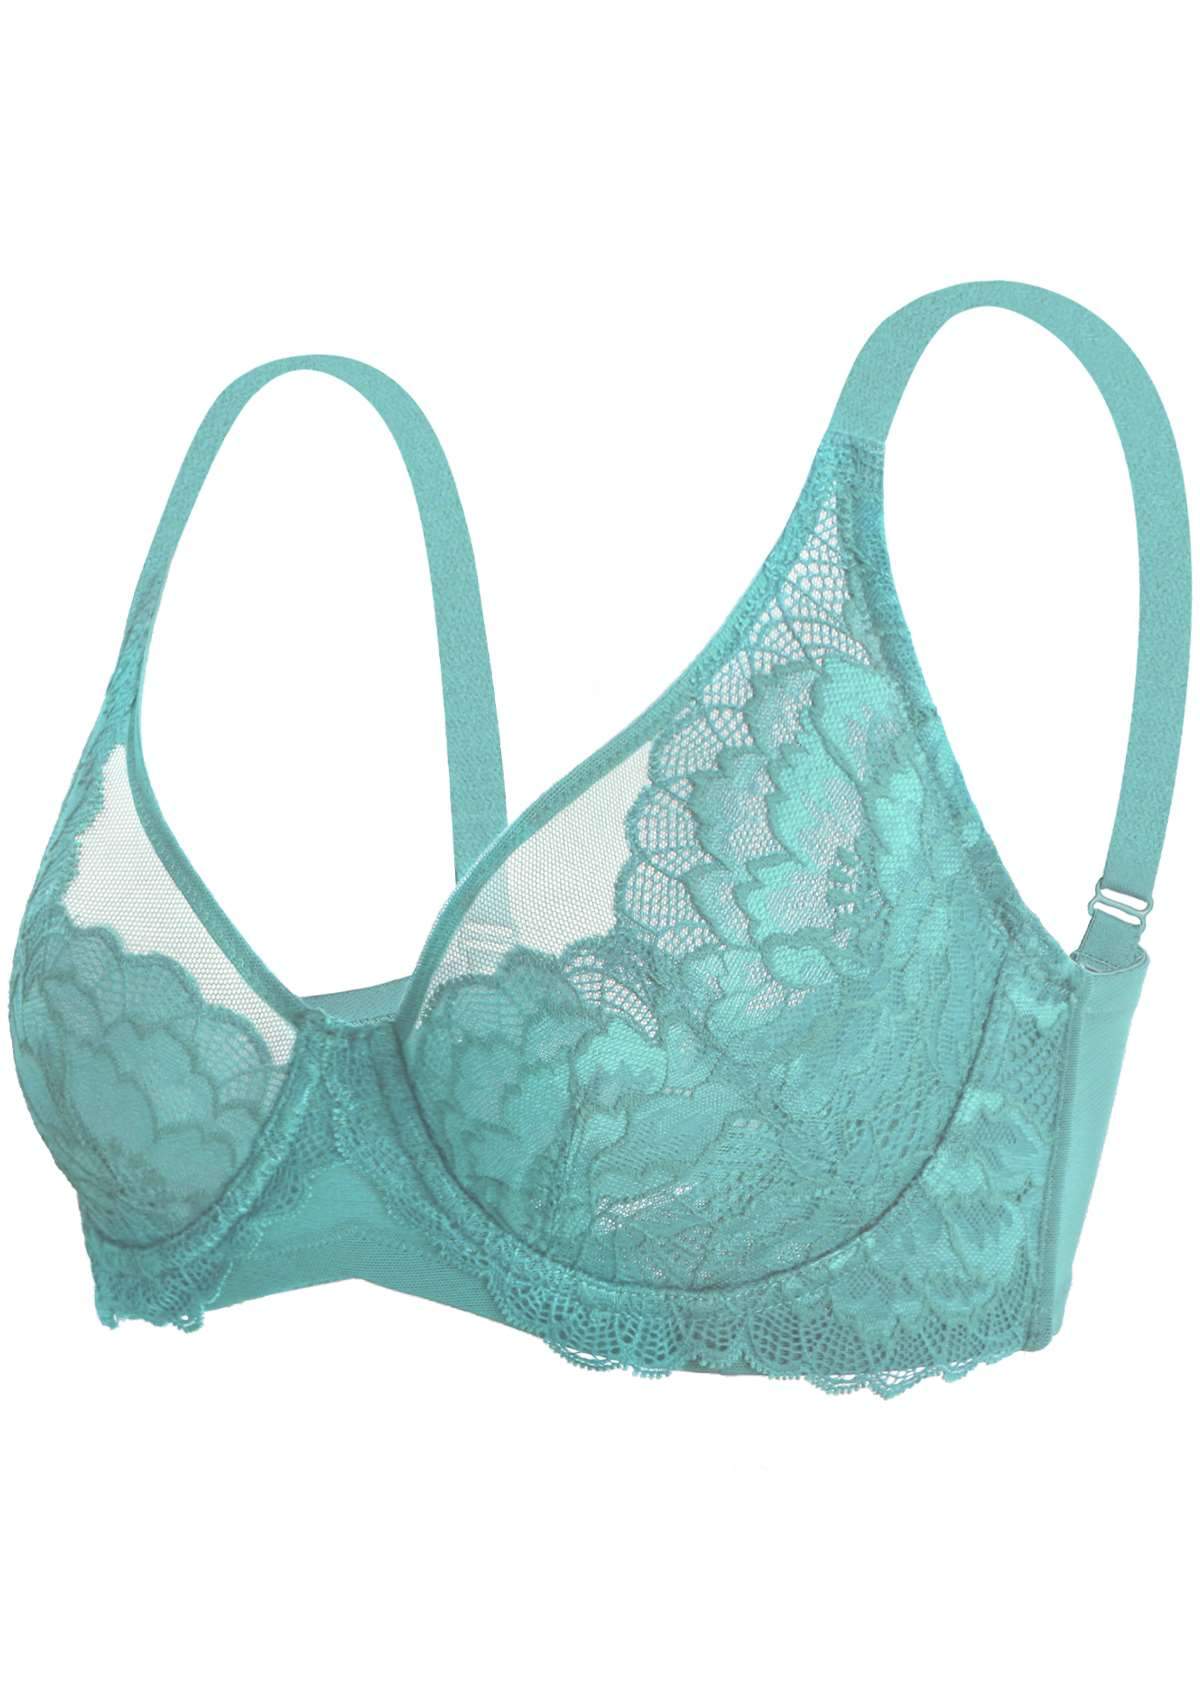 HSIA Paeonia Lace Full Coverage Underwire Non-Padded Uplifting Bra - Teal / 34 / DD/E